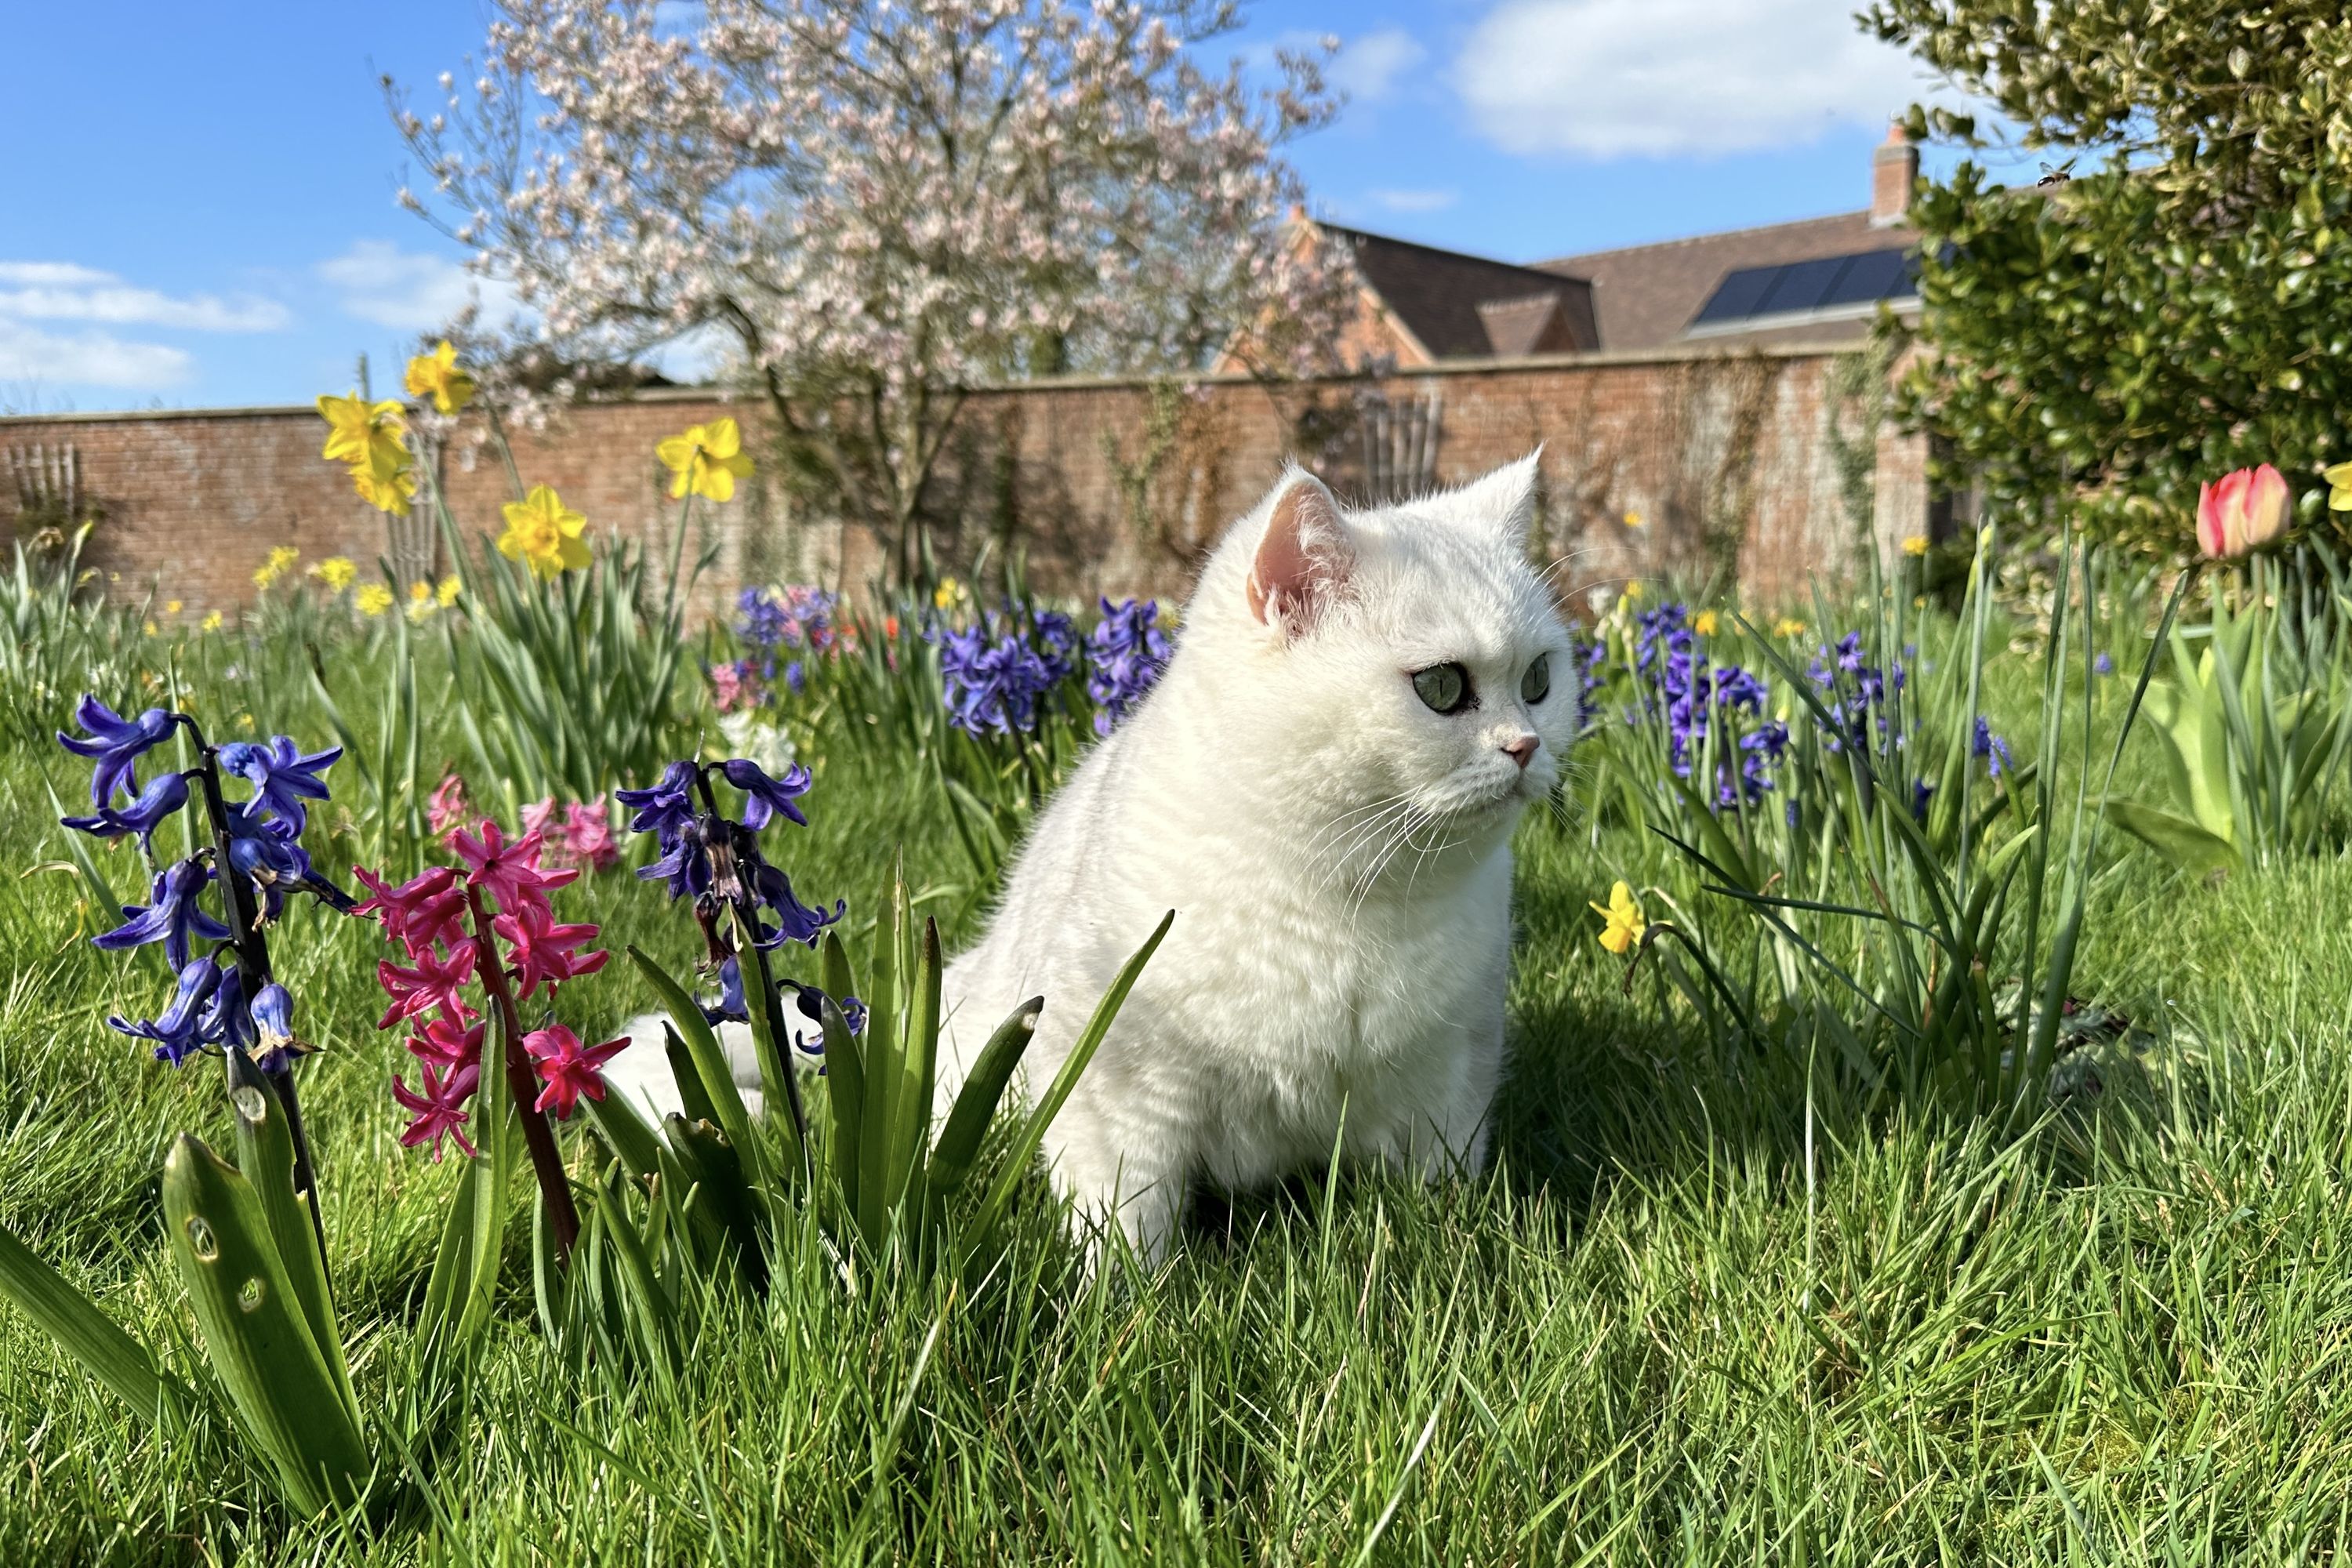 Rosalind among the flowers